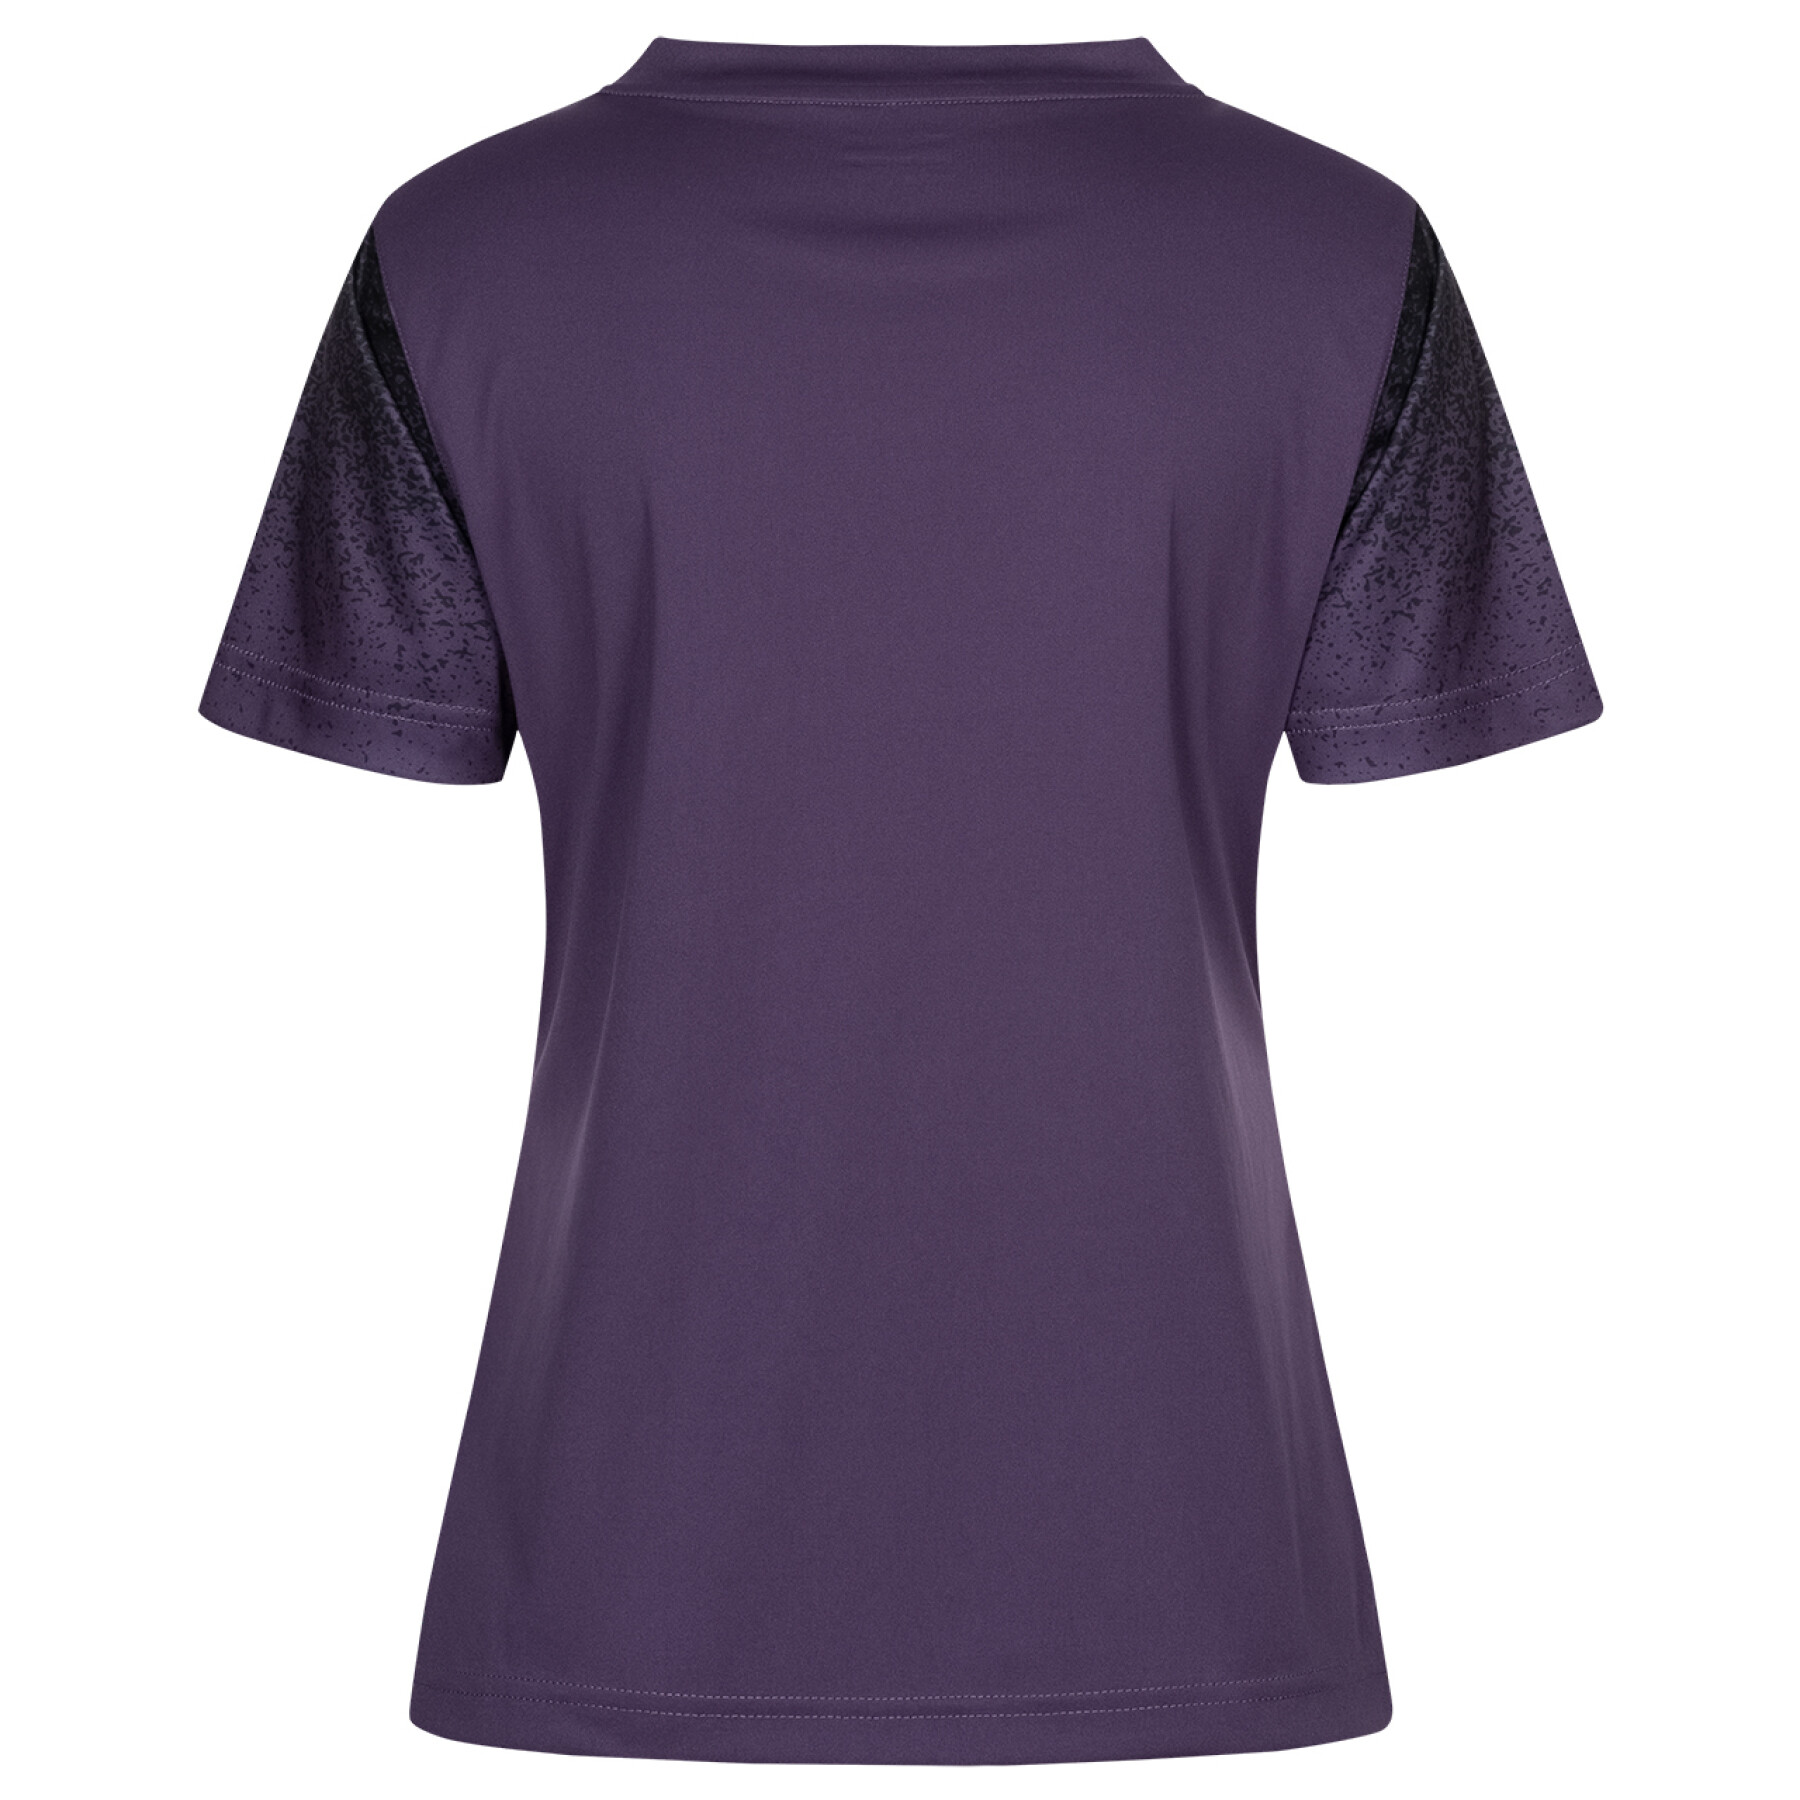 Girl's jersey athletic top Donic Rafter